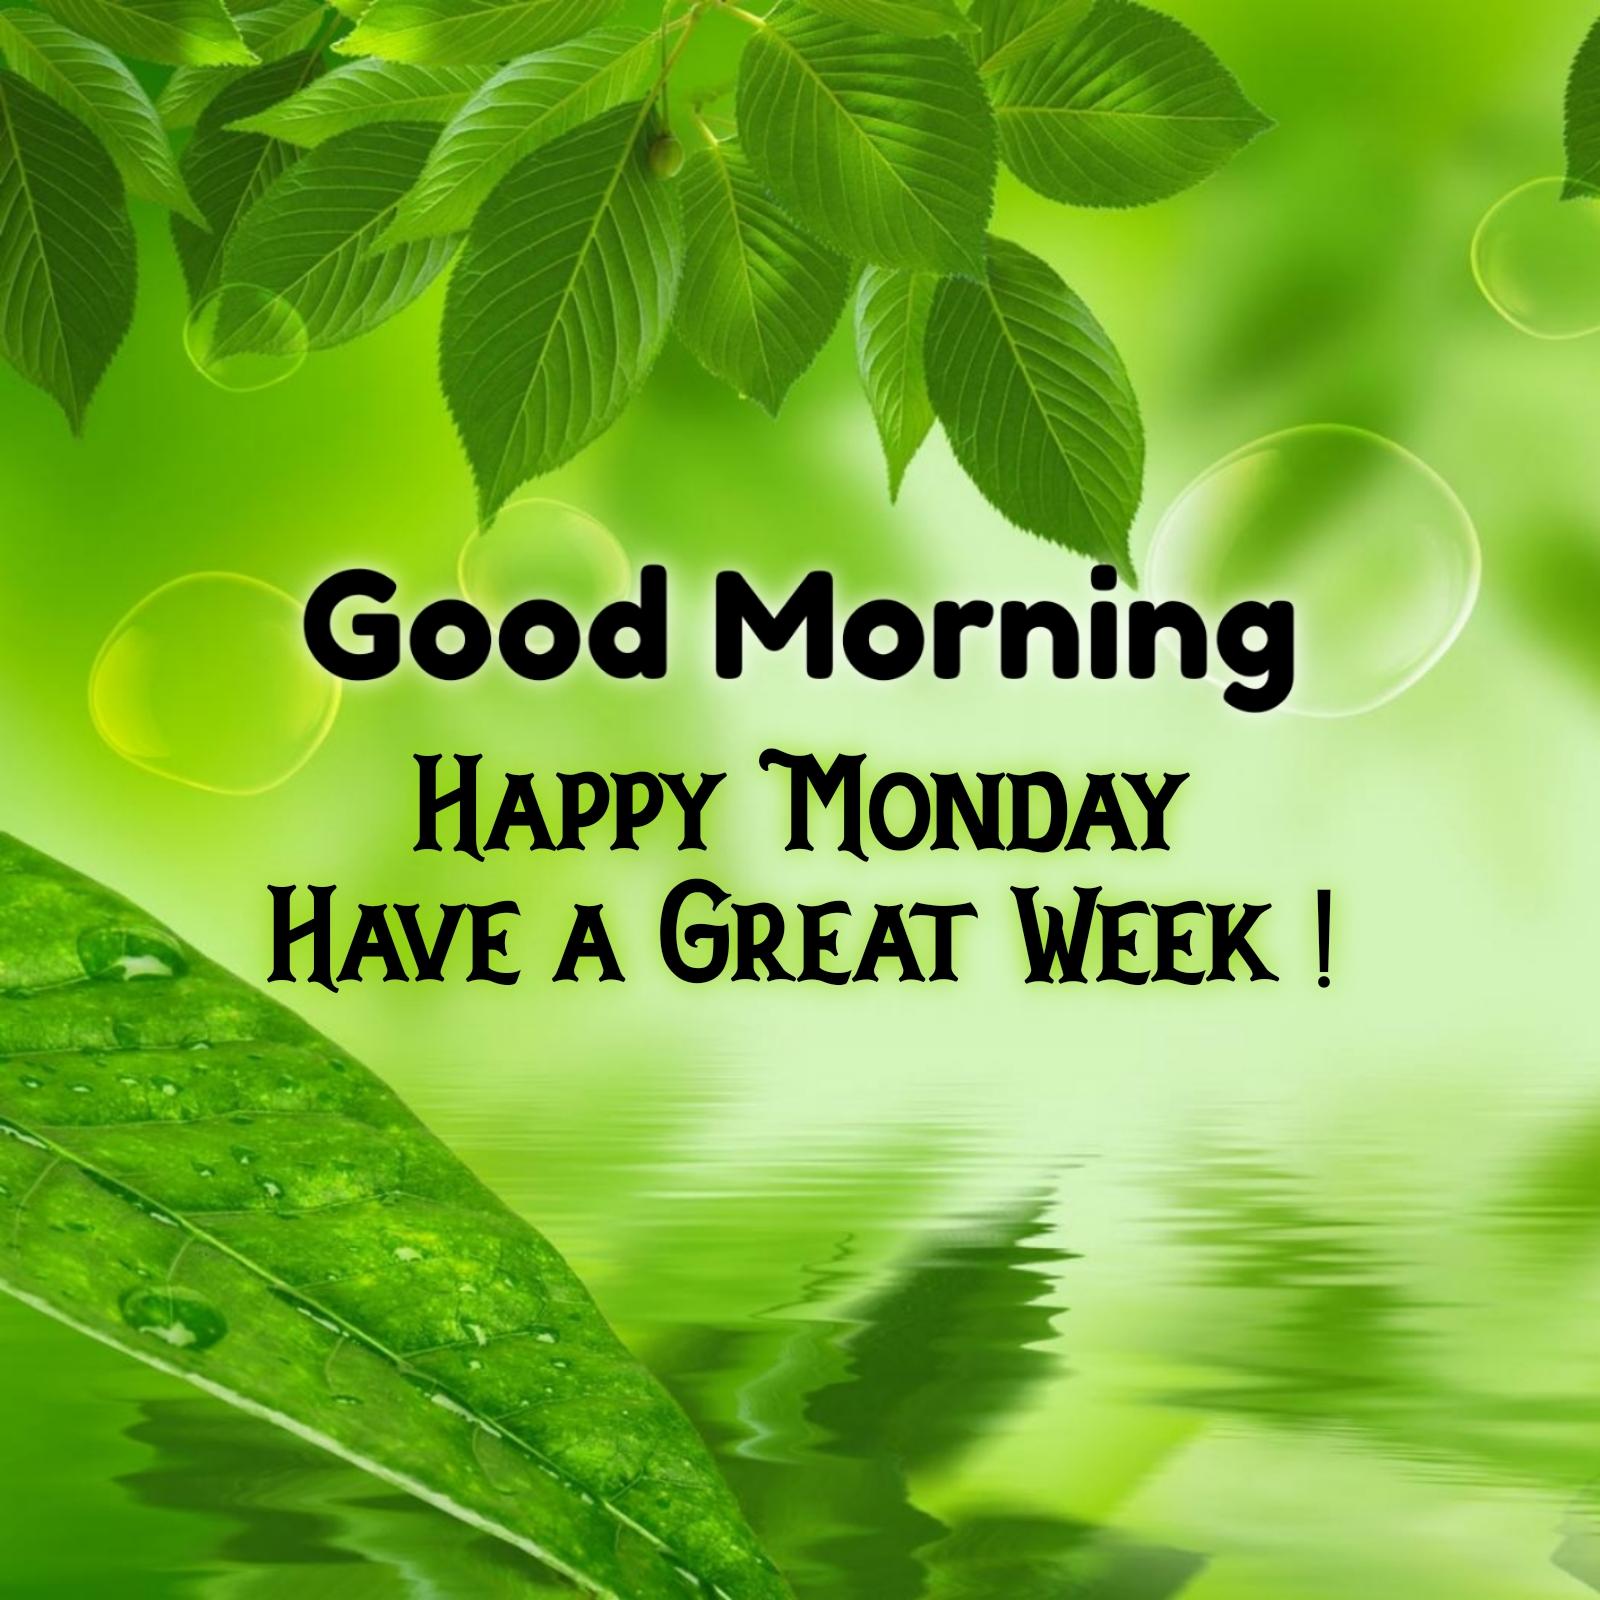 Good Morning Happy Monday Have a Great Week Images